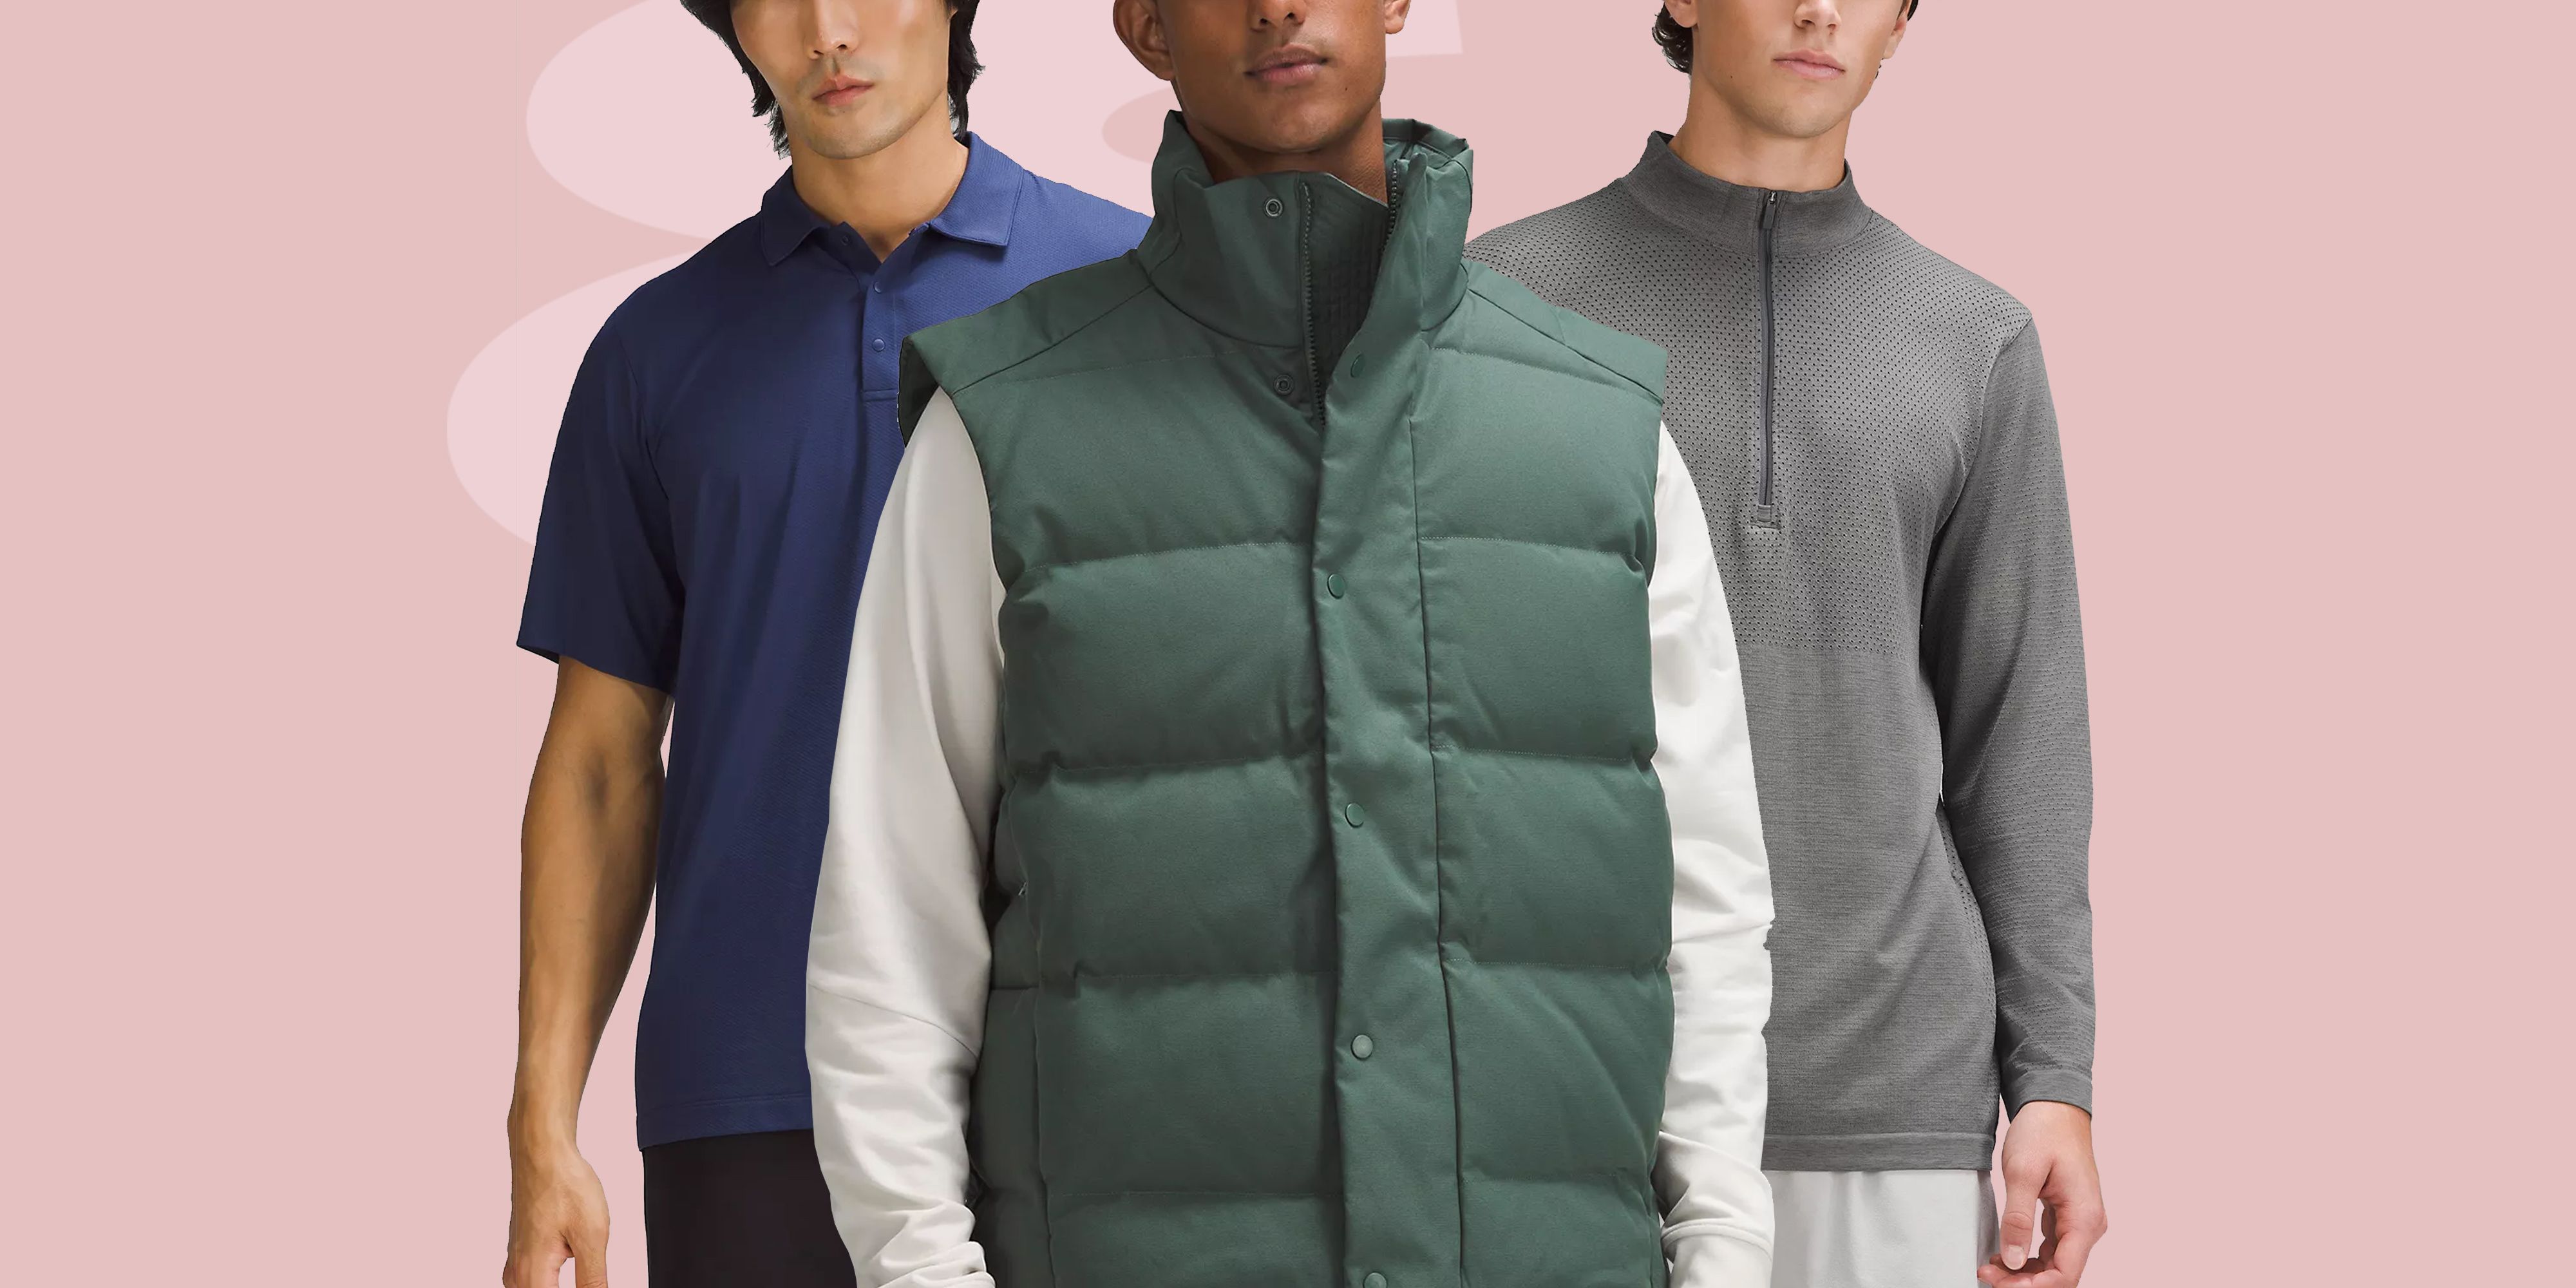 lululemon Will Keep You Warm With This Wunder Puff Jacket - Men's Journal